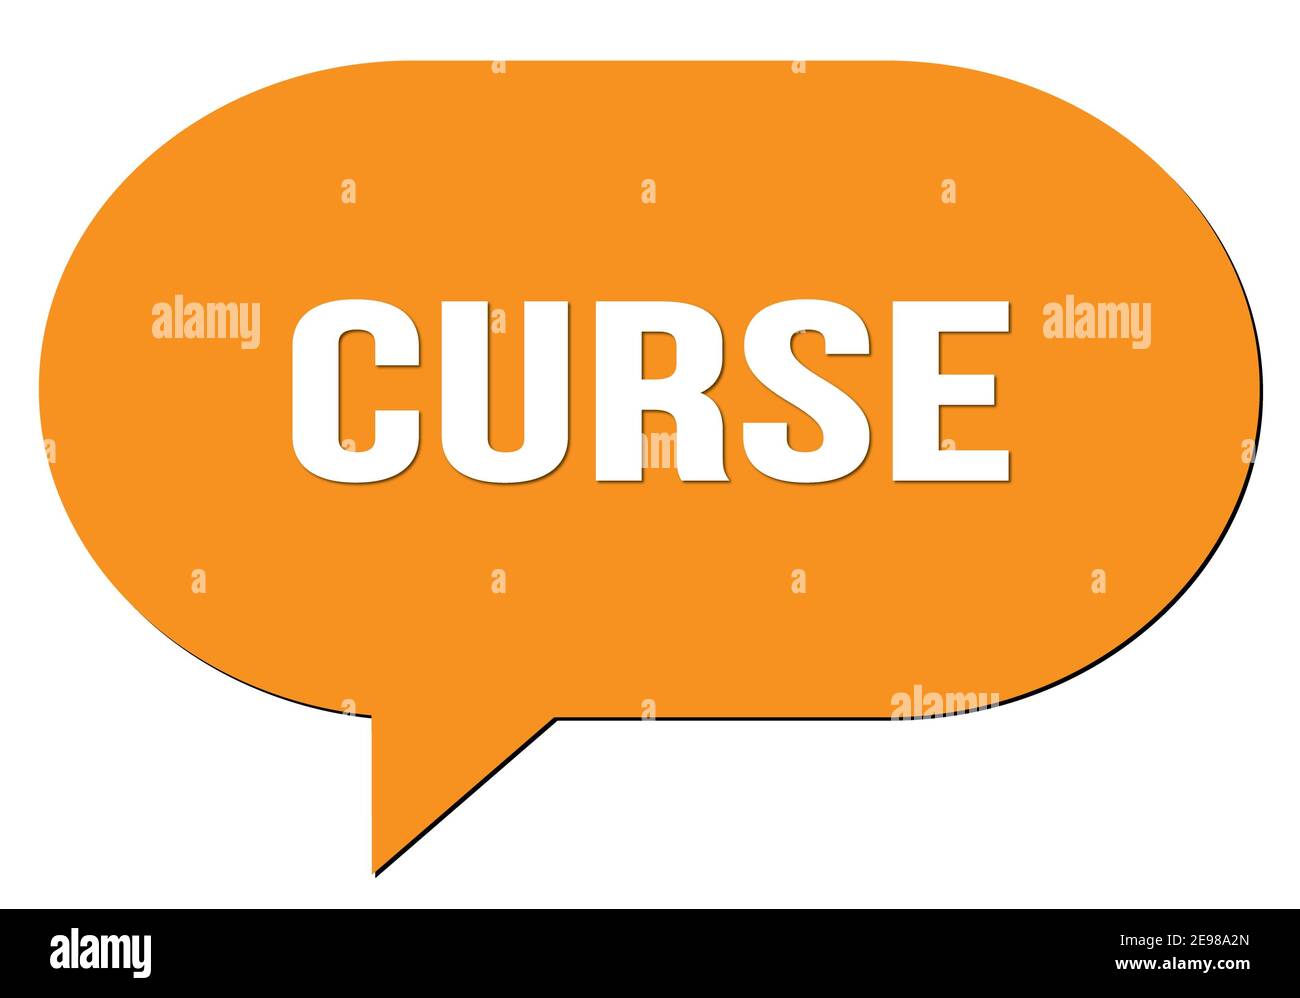 Meaning of Curse